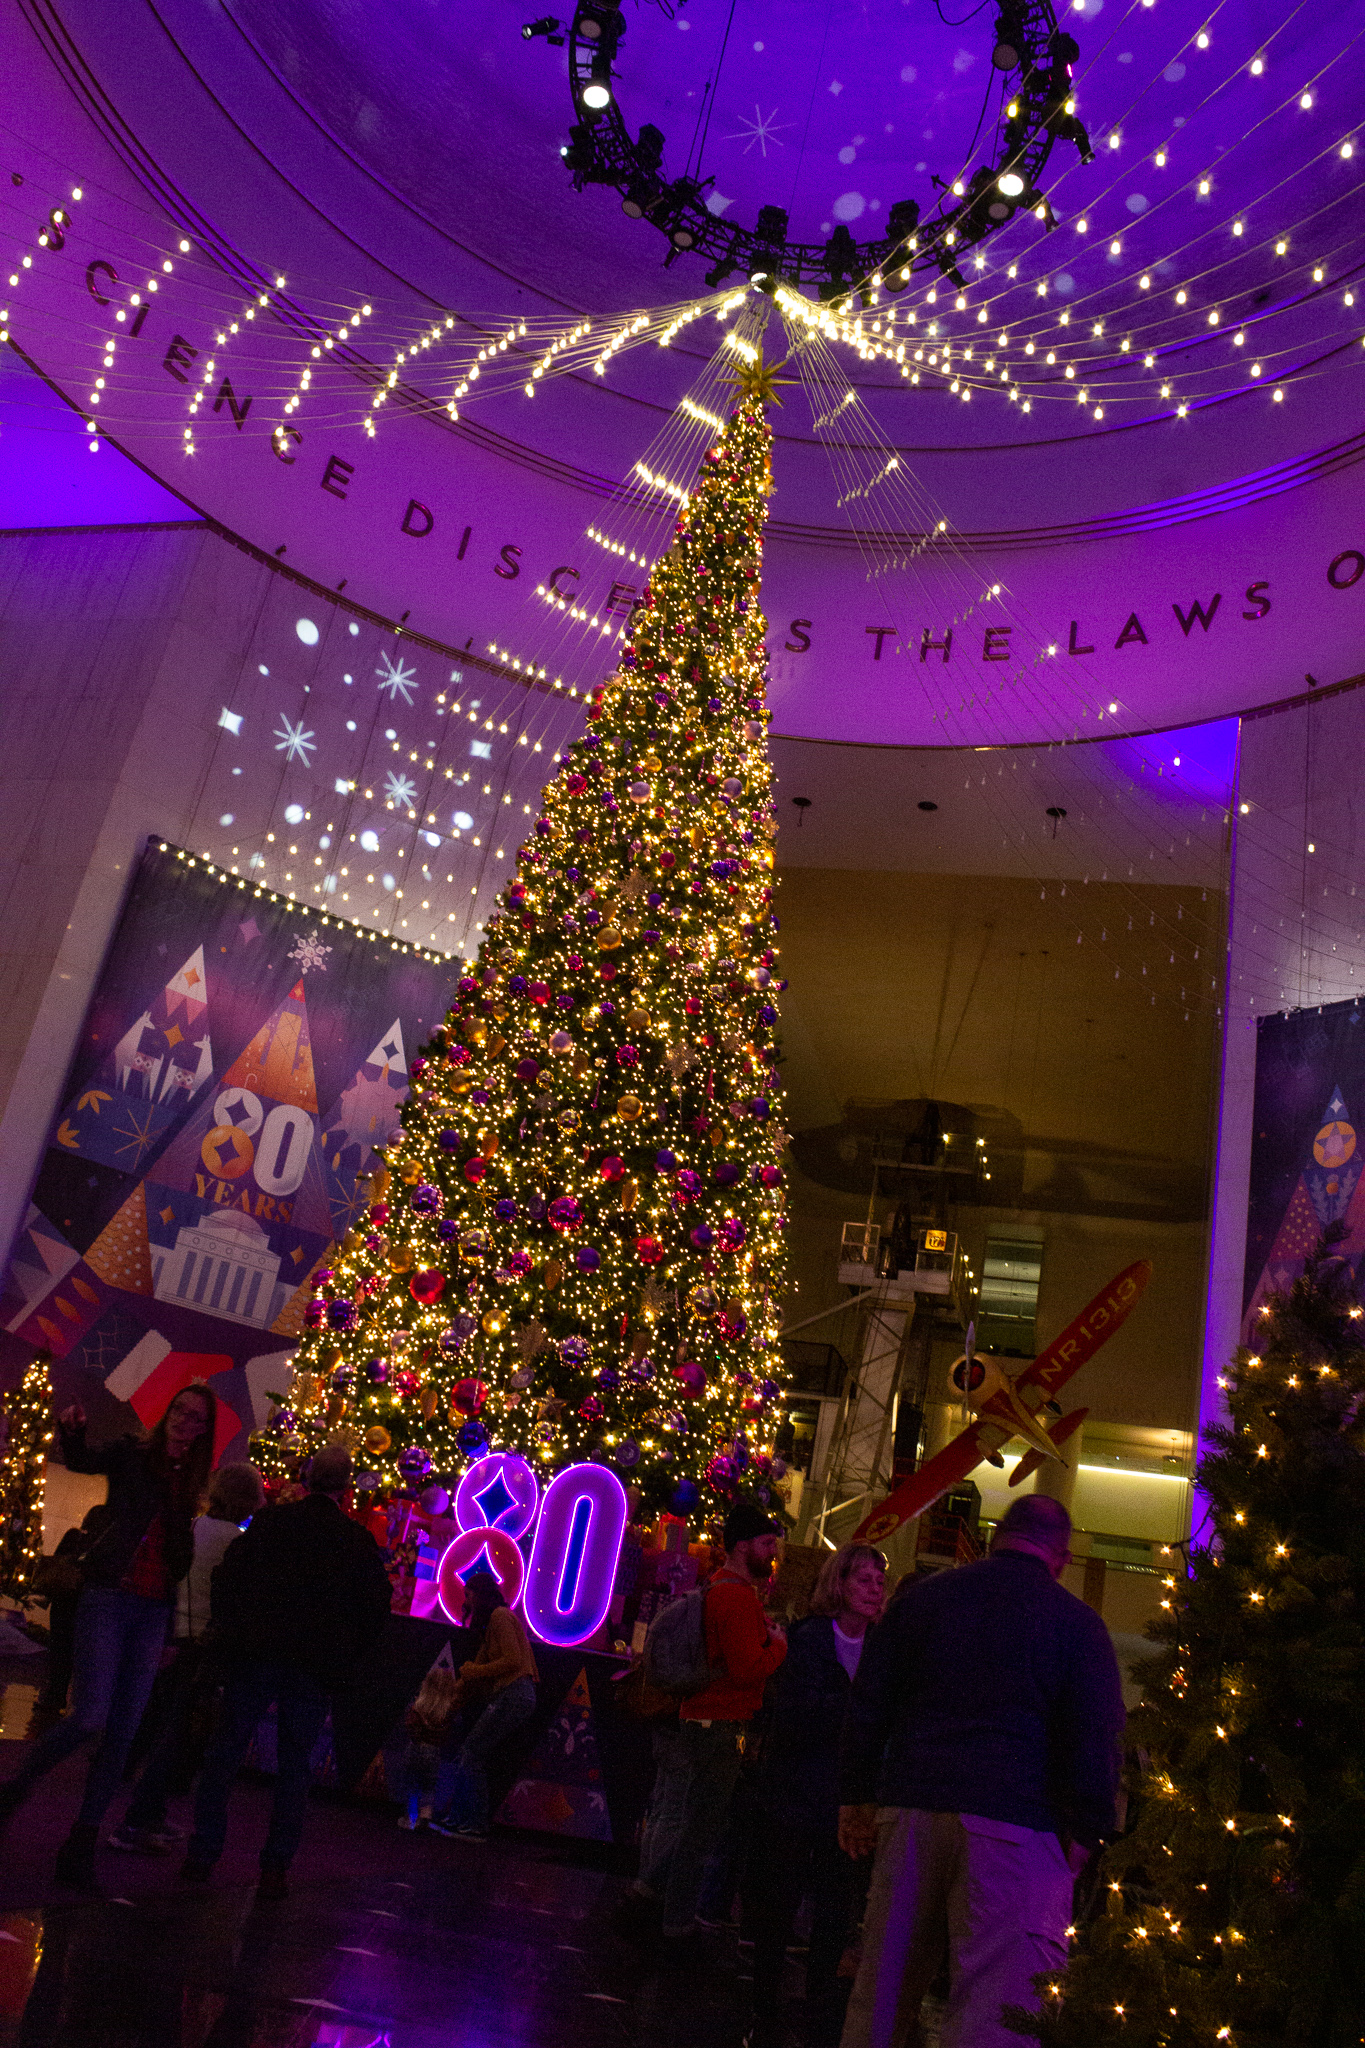 Angled vertical view of huge, tall, lighted Christmas tree in a large, round central room